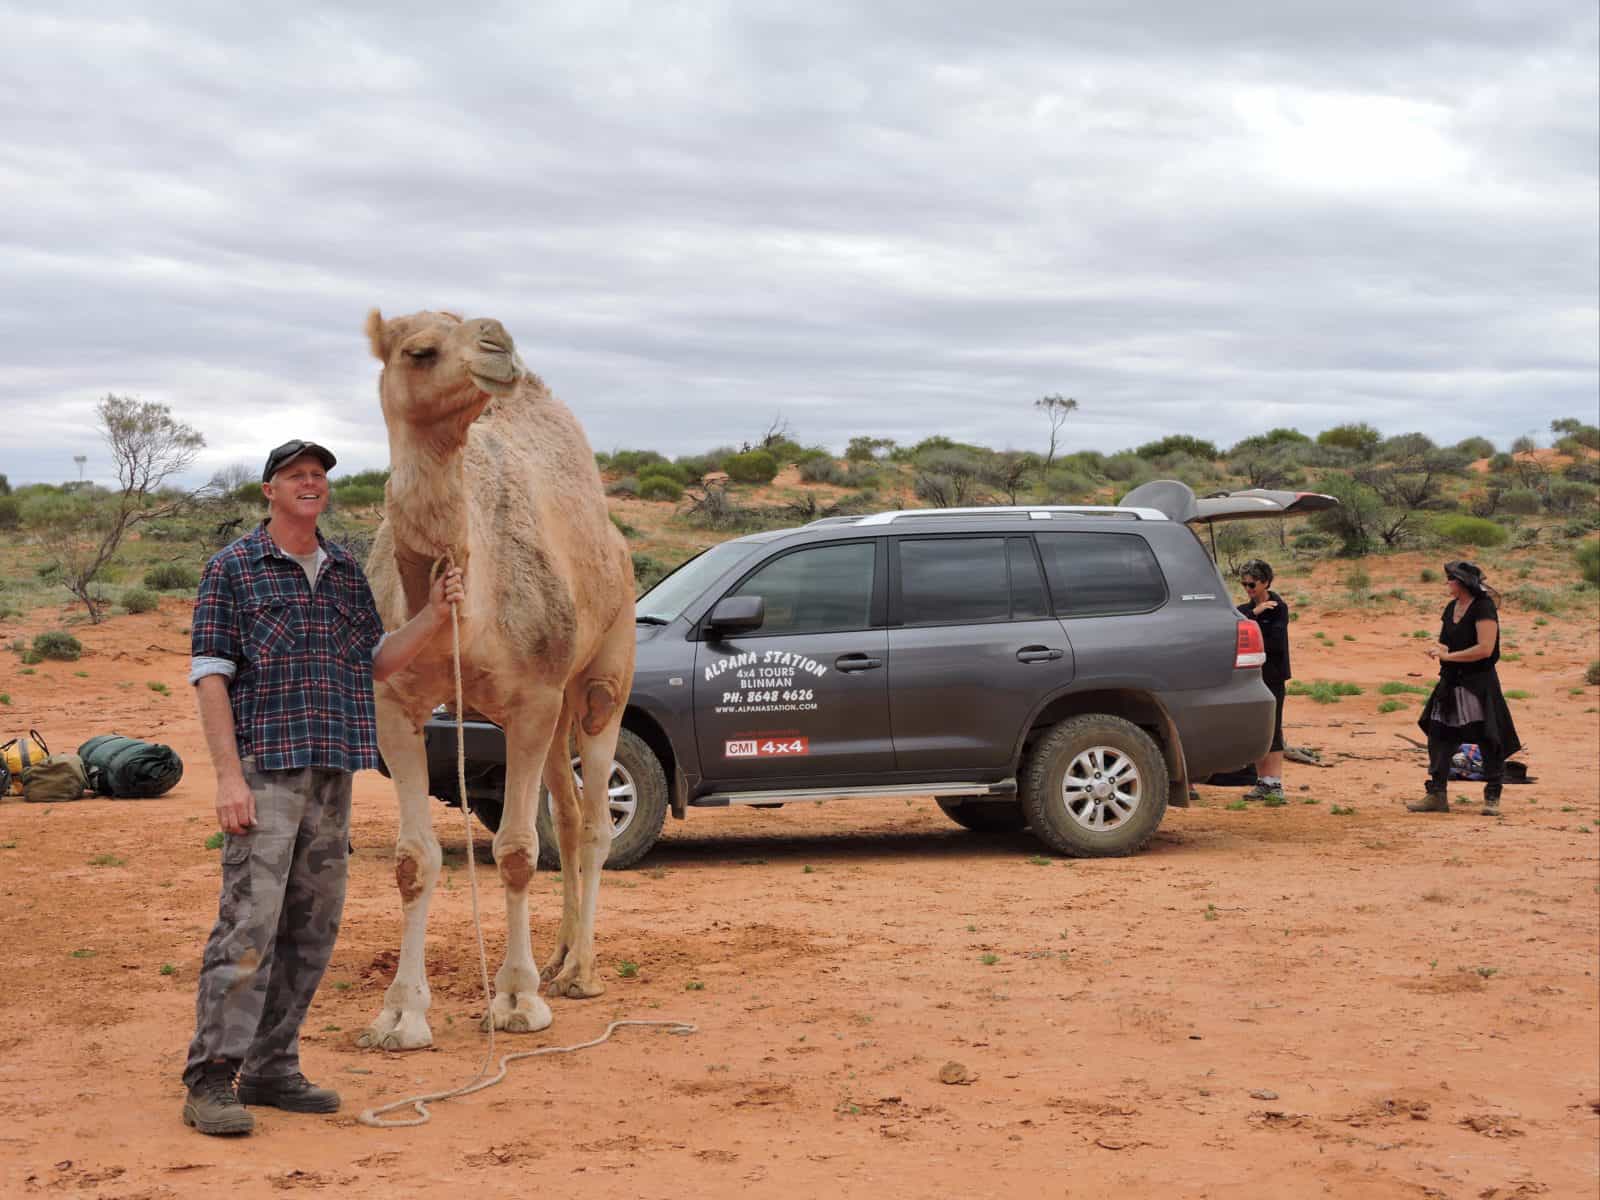 Kim Geue and Bubbles with the Alpana vehicle for a camel trek transport.